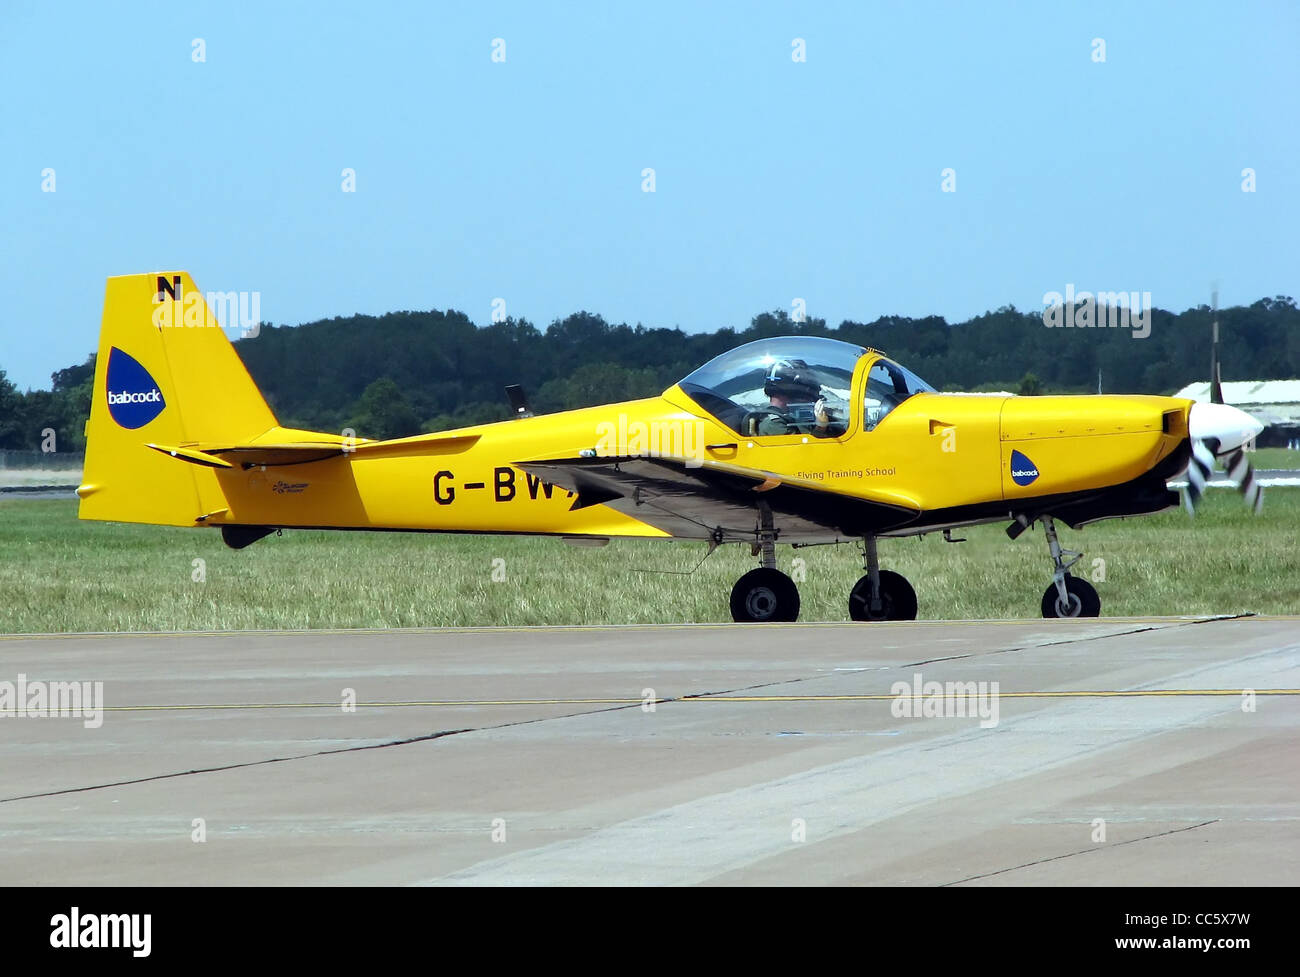 Slingsby Firefly T67M-260 of the UK Defence Elementary Flying Training School, taxiing at the Royal International Air Tattoo, Fa Stock Photo